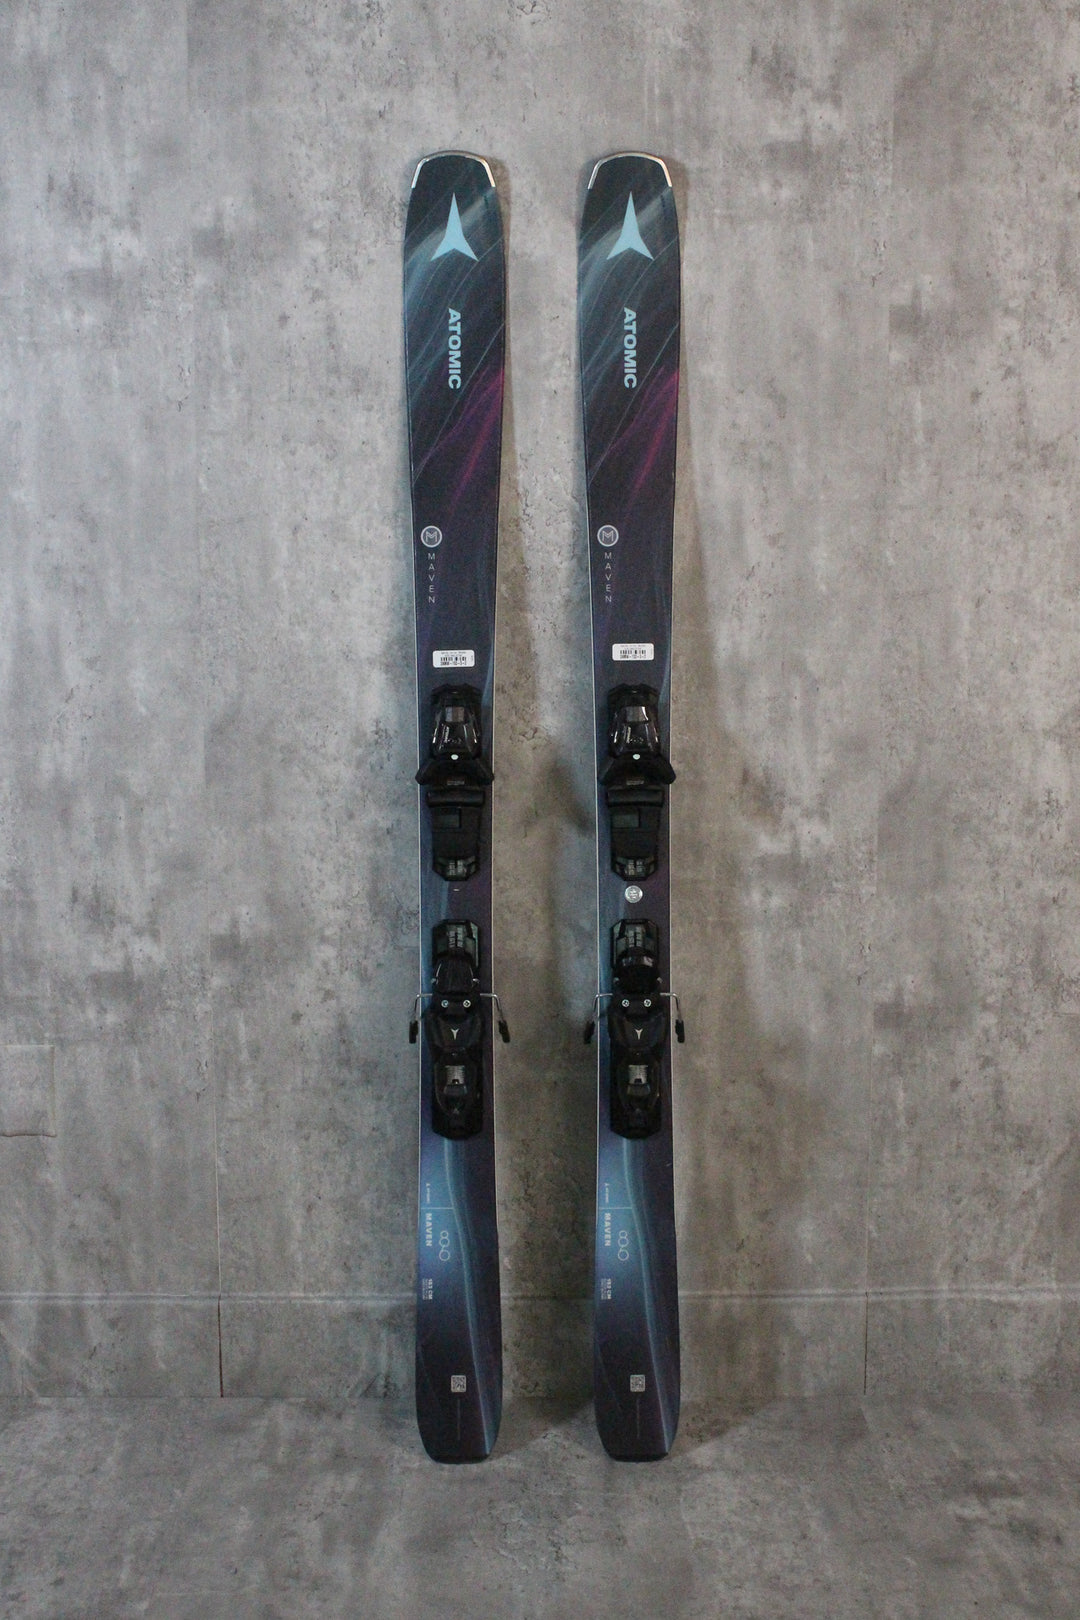 Approved by the Atomic #sheskis team, the all-mountain Maven 86 offers precise, relaxed skiing in any snow condition. With a versatile Flow Profile, poplar wood core, and lightweight fiberglass layers, it combines stability and responsiveness. Its Dura Cap sidewall and adventure-ready graphics complete the package. Available as used skis in Park City.